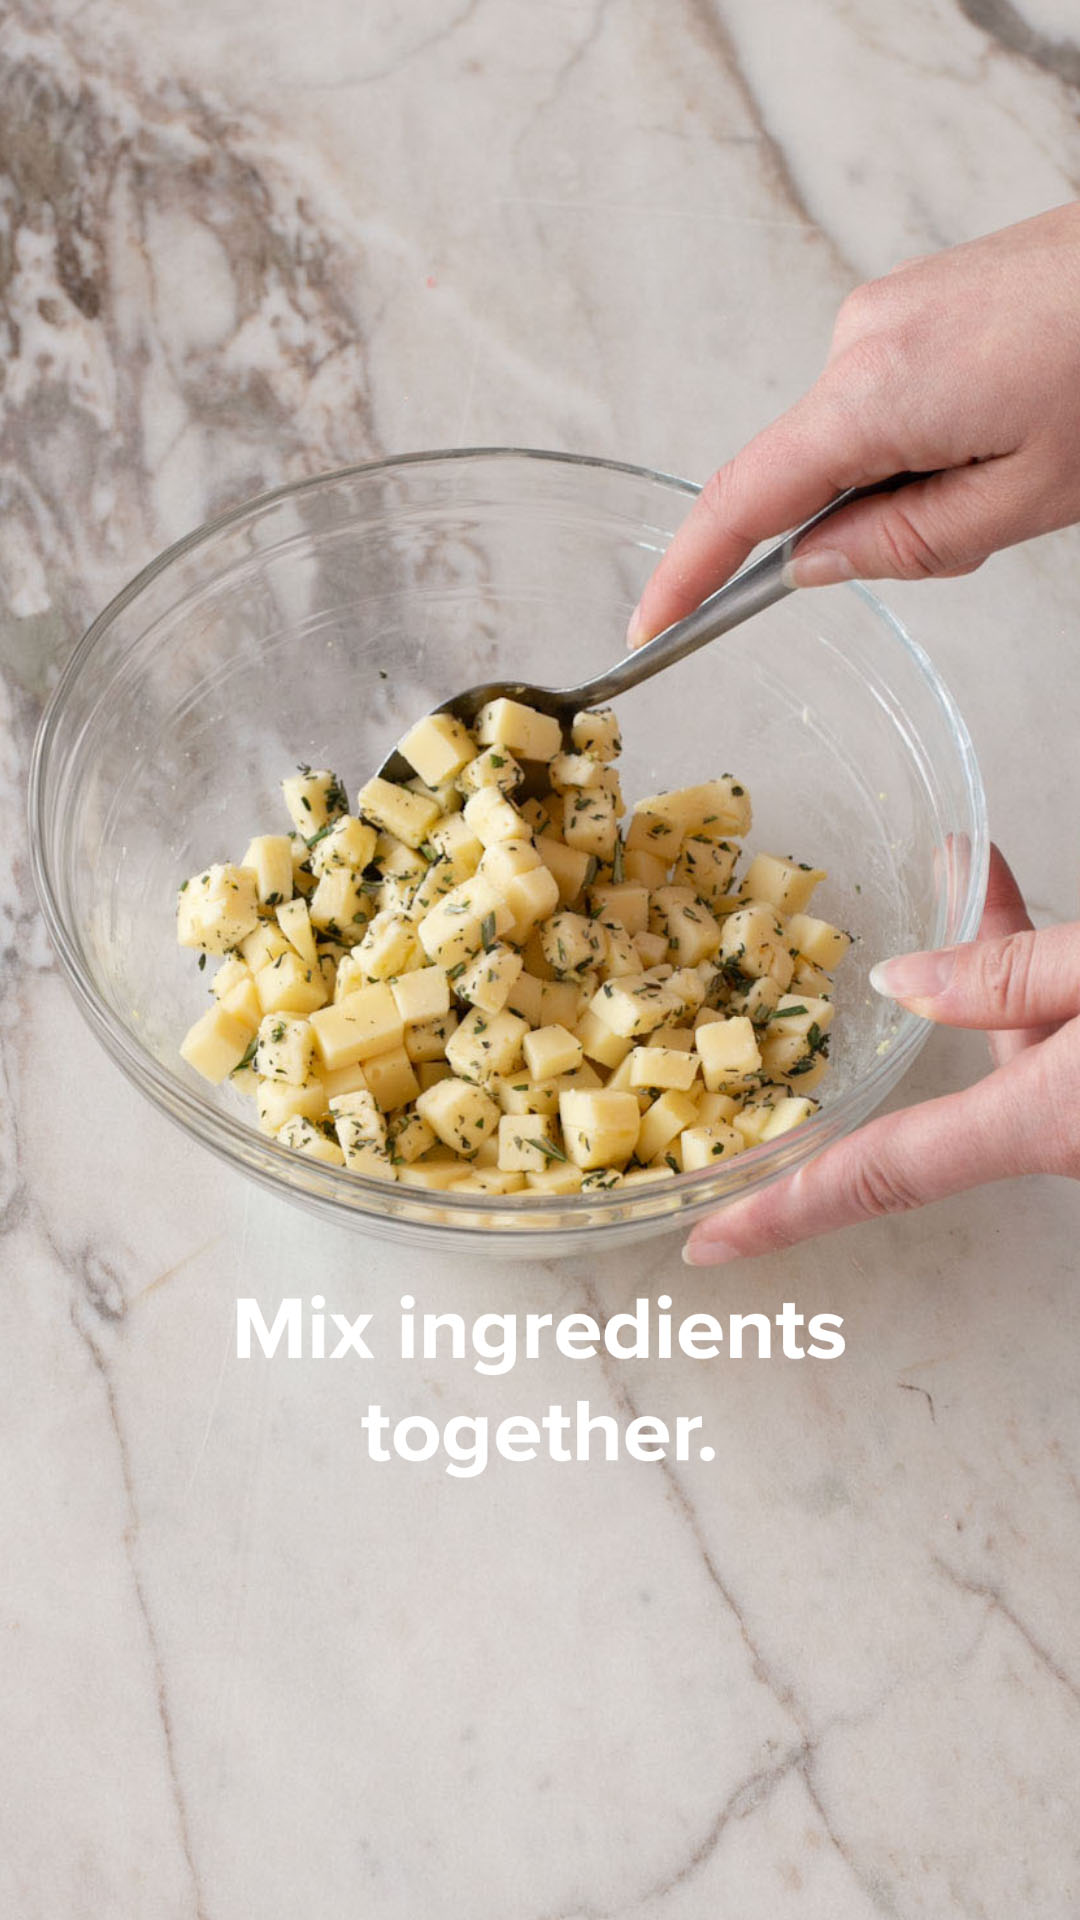 Mix ingredients together in a bowl.